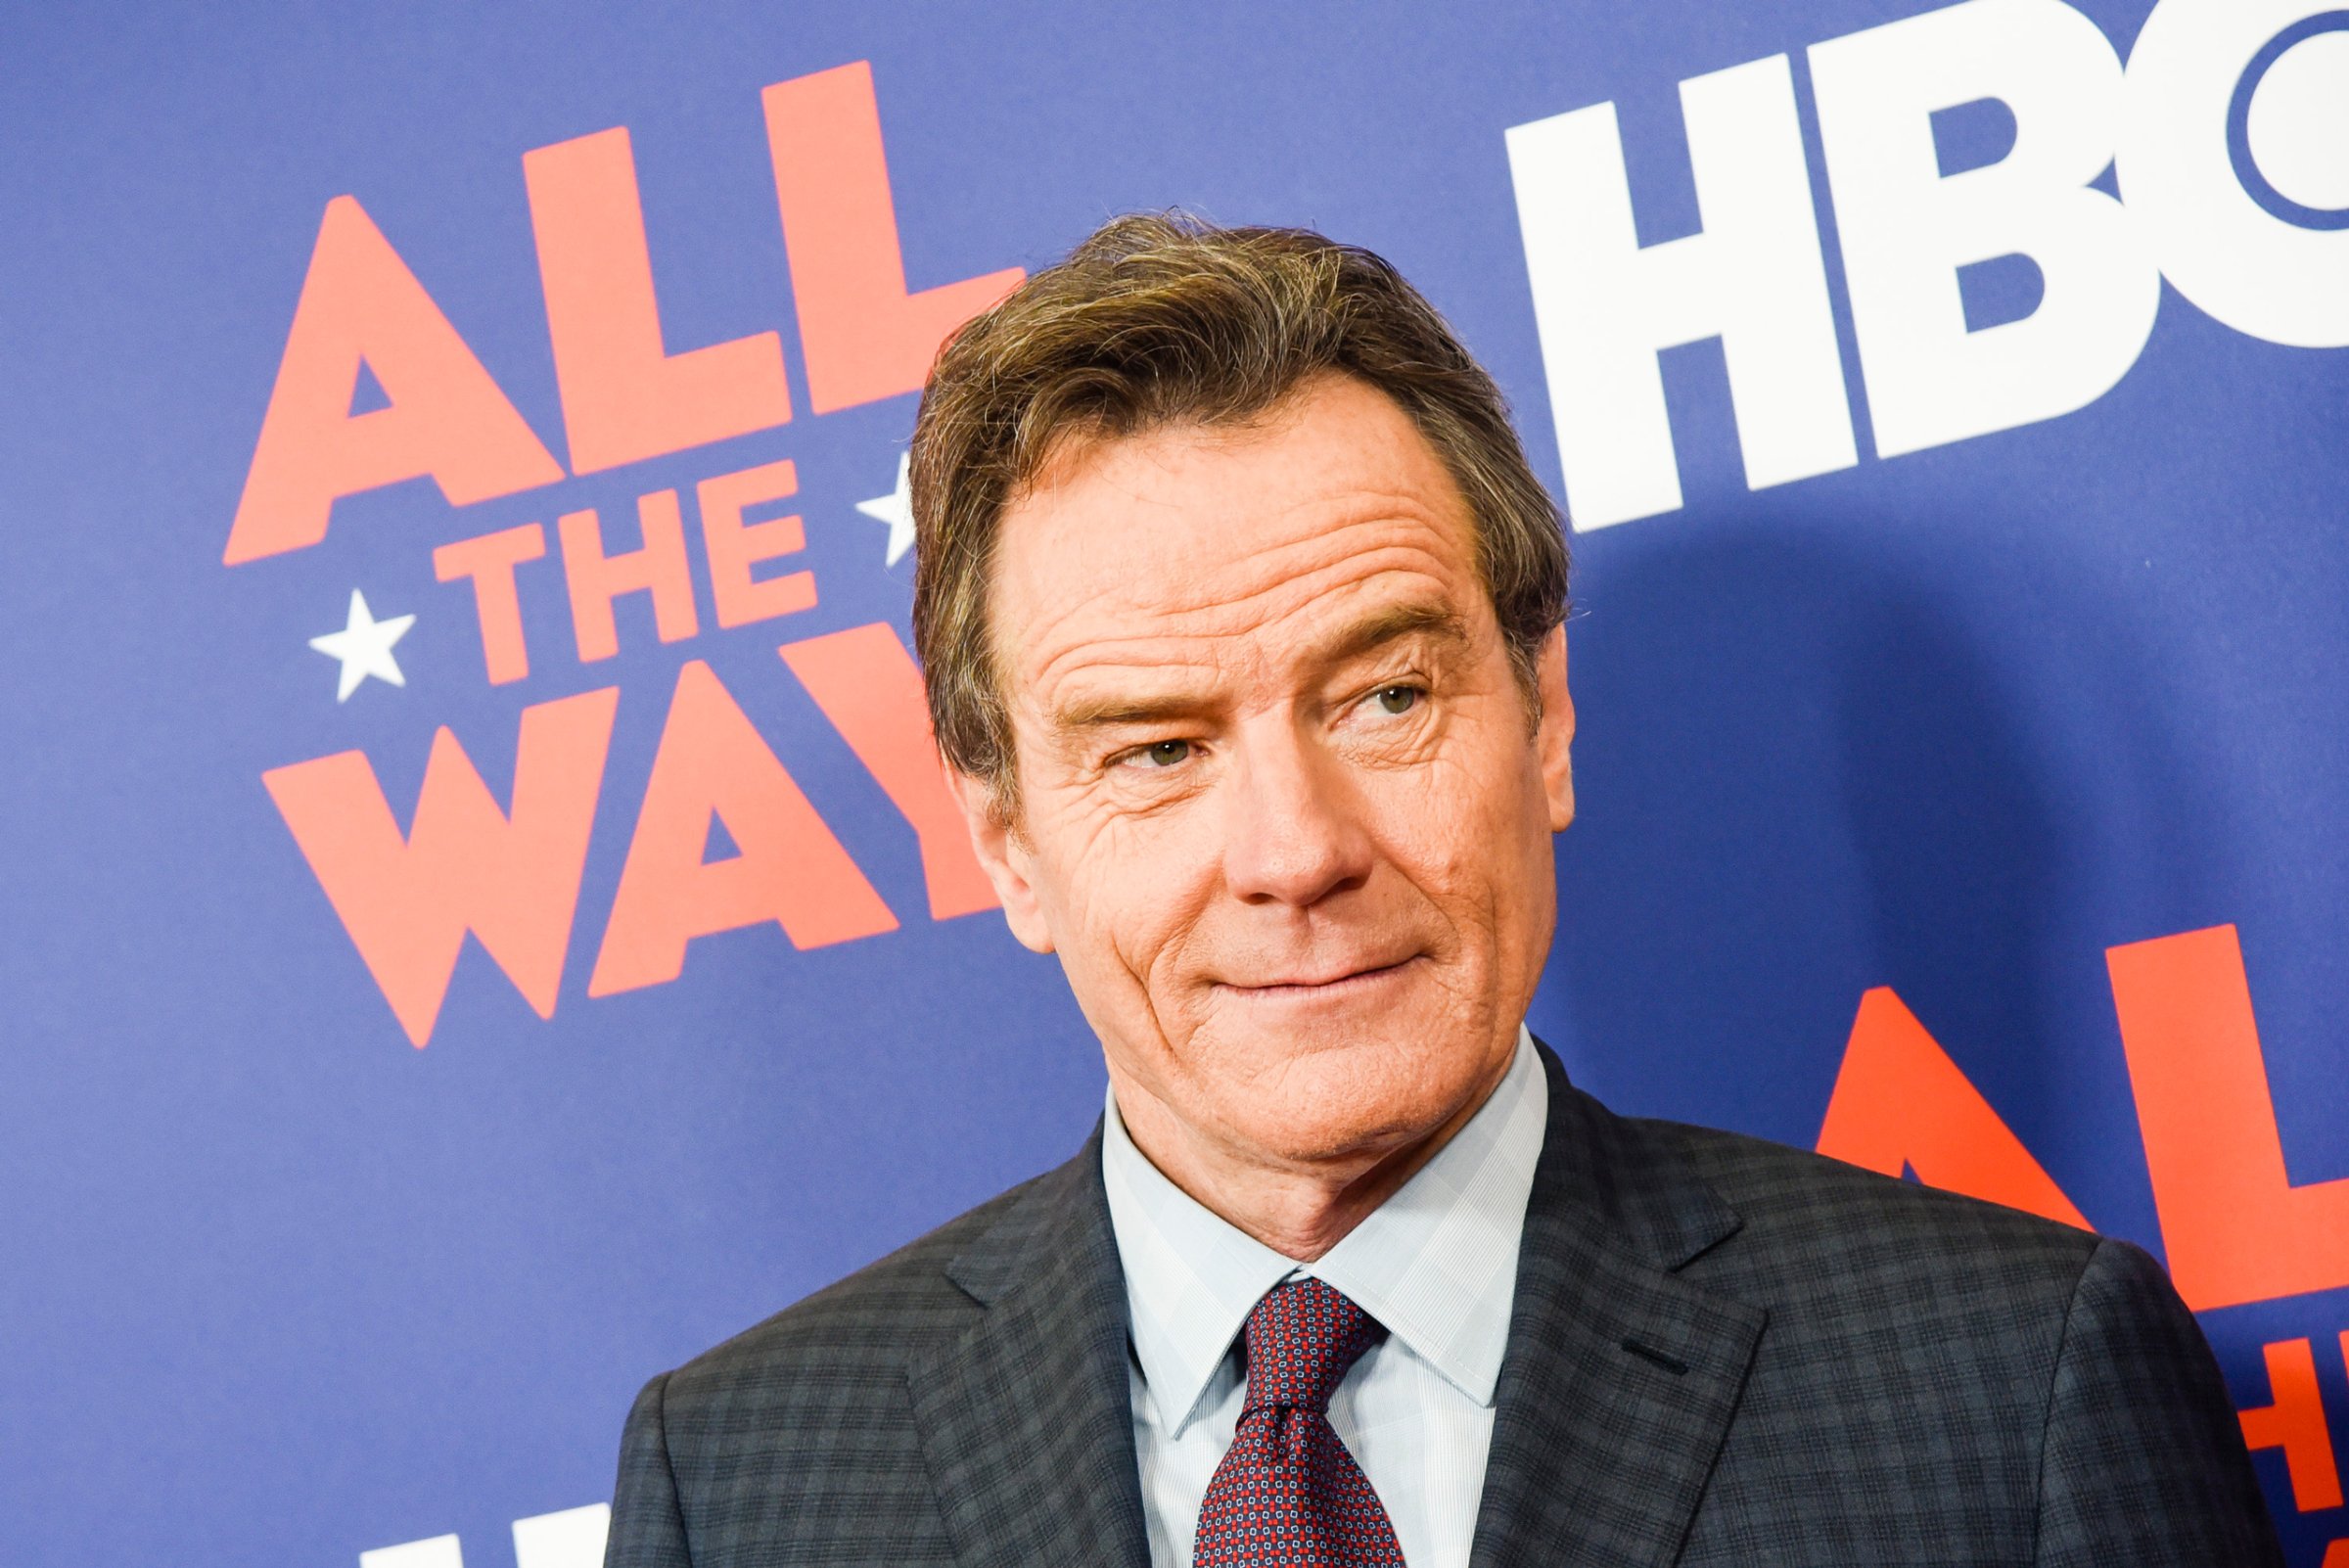 WASHINGTON, DC - MAY 16: Actor Bryan Cranston poses for photographers during HBO's "All The Way" Washington, DC Screening at The National Archives on May 16, 2016 in Washington, DC. (Photo by Kris Connor/Getty Images)